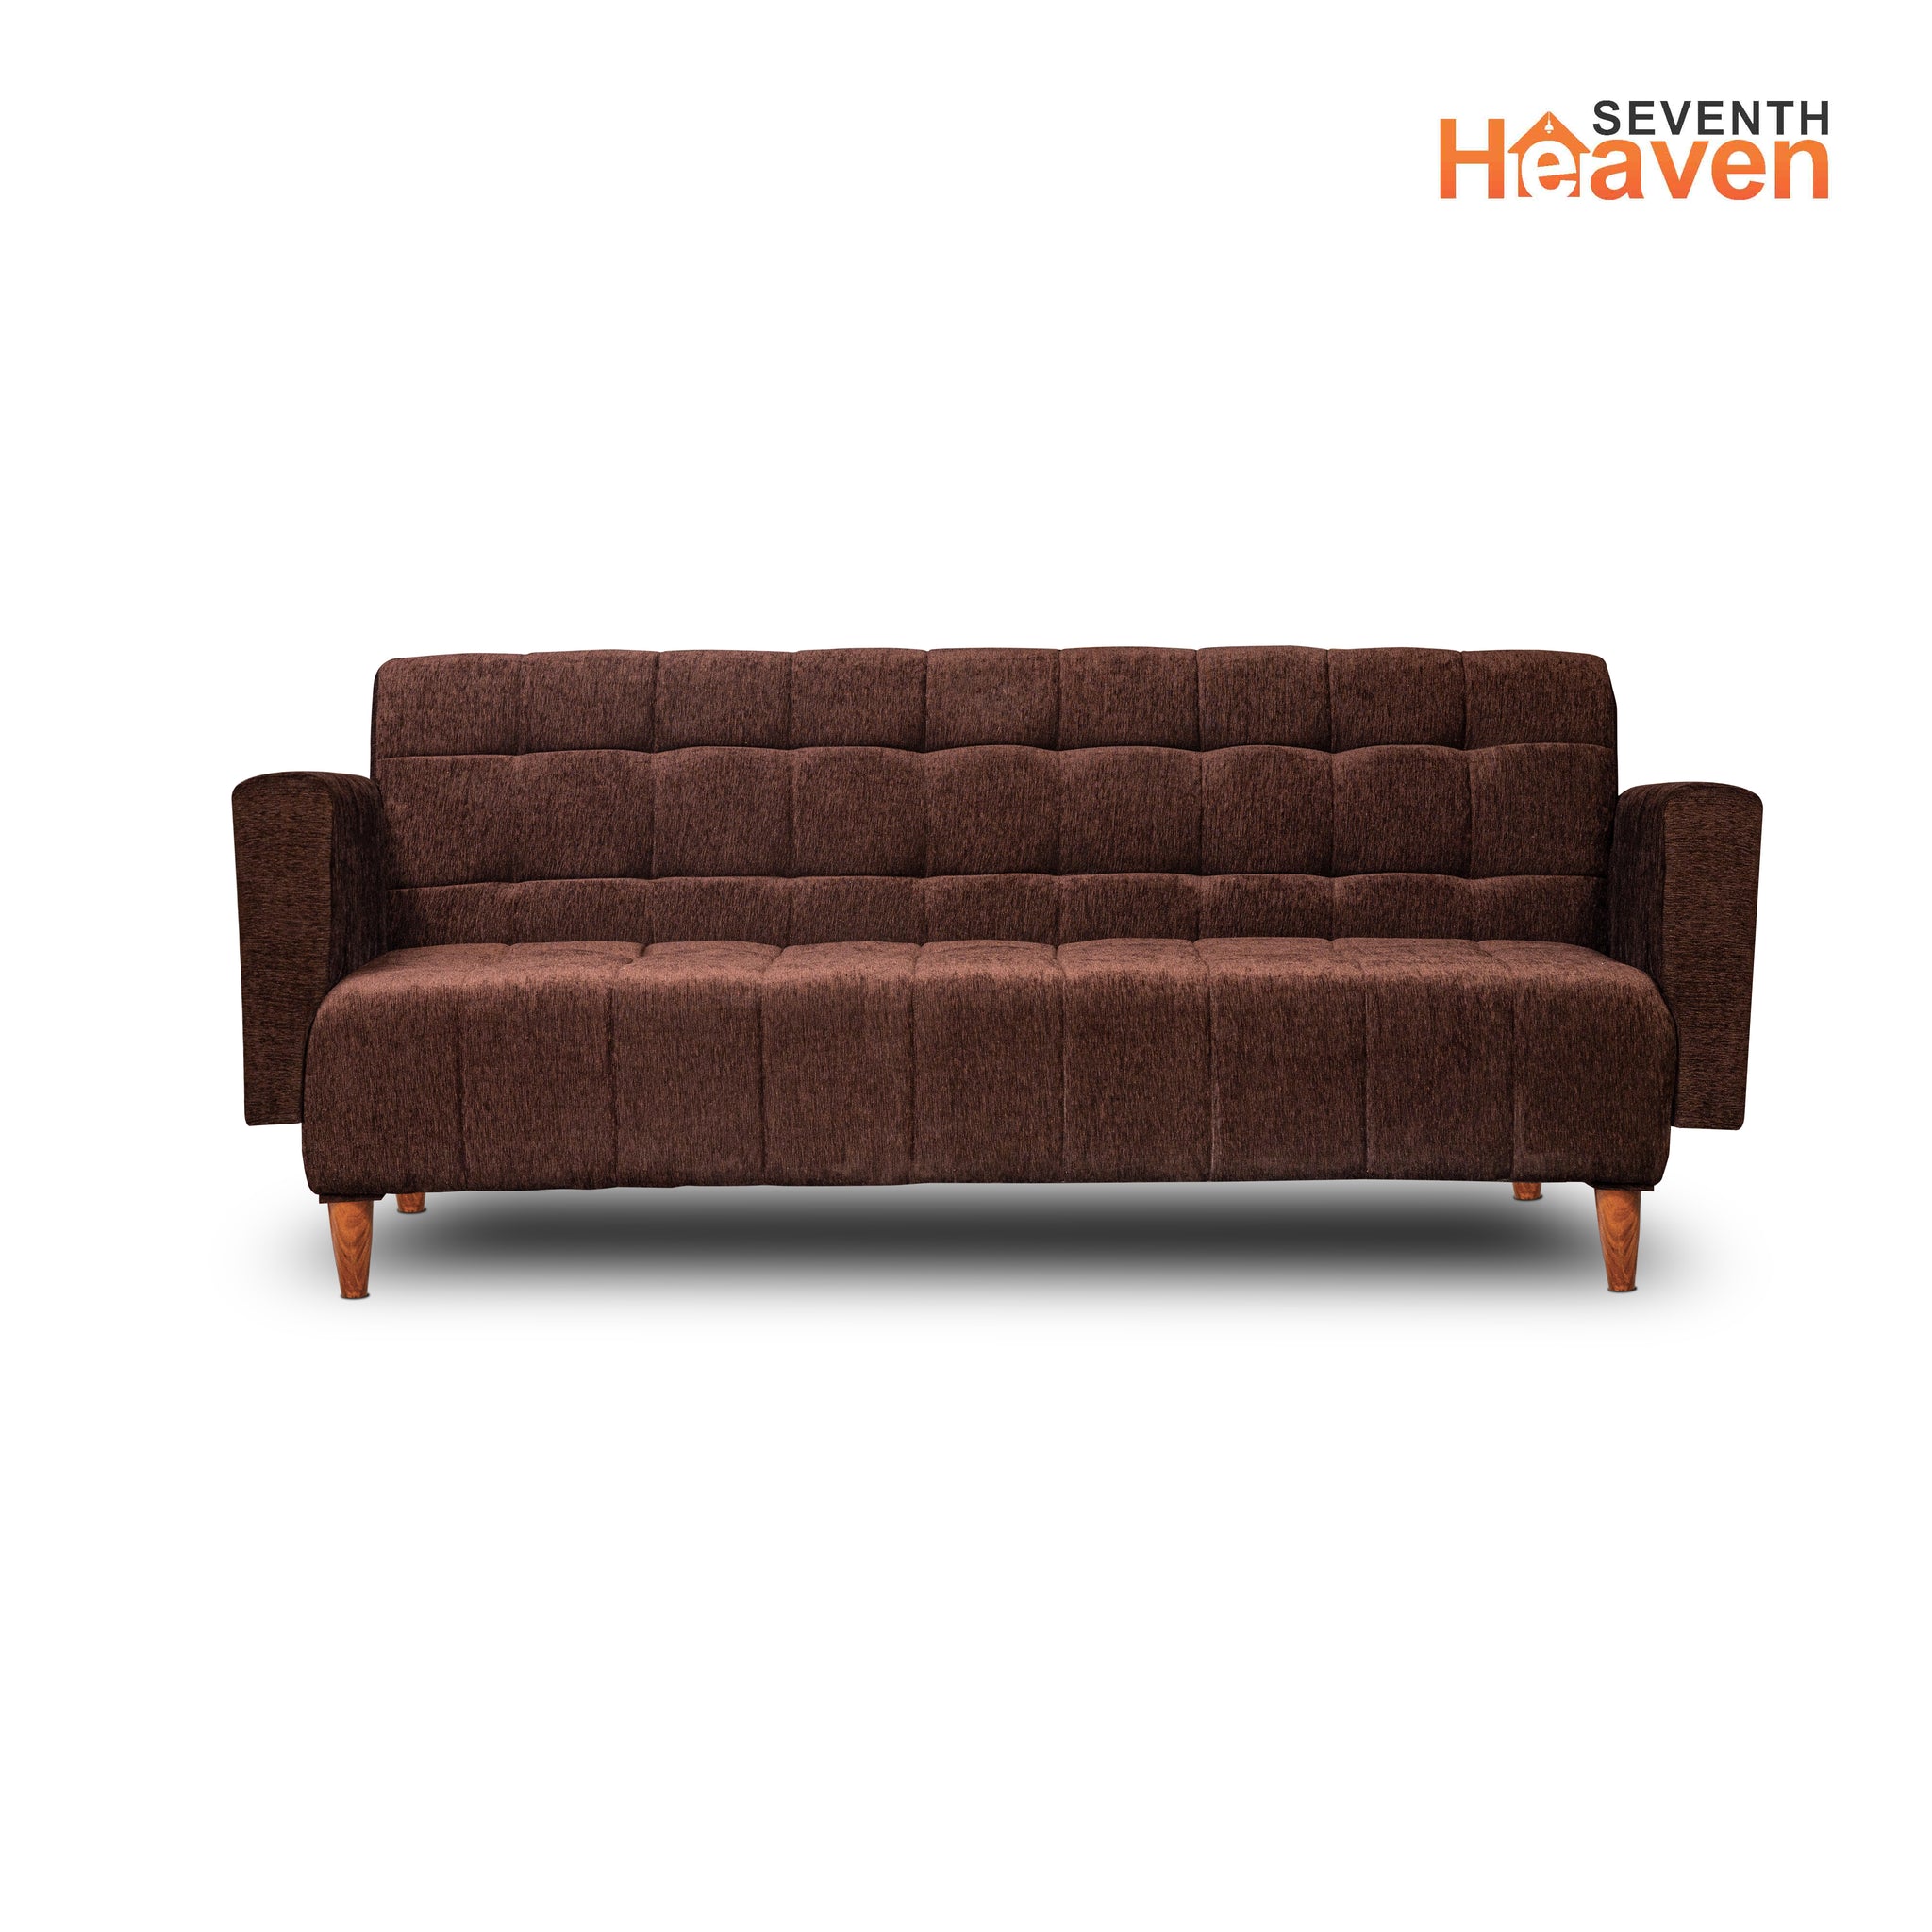 Seventh Heaven Lisbon 4 Seater Wooden Sofa Cum Bed with Armrest. Modern & Elegant Smart Furniture Range for luxurious homes, living rooms and offices. Use as a sofa, lounger or bed with removable armrest. Perfect for guests. Molphino fabric with sheesham polished wooden legs. Brown colour.